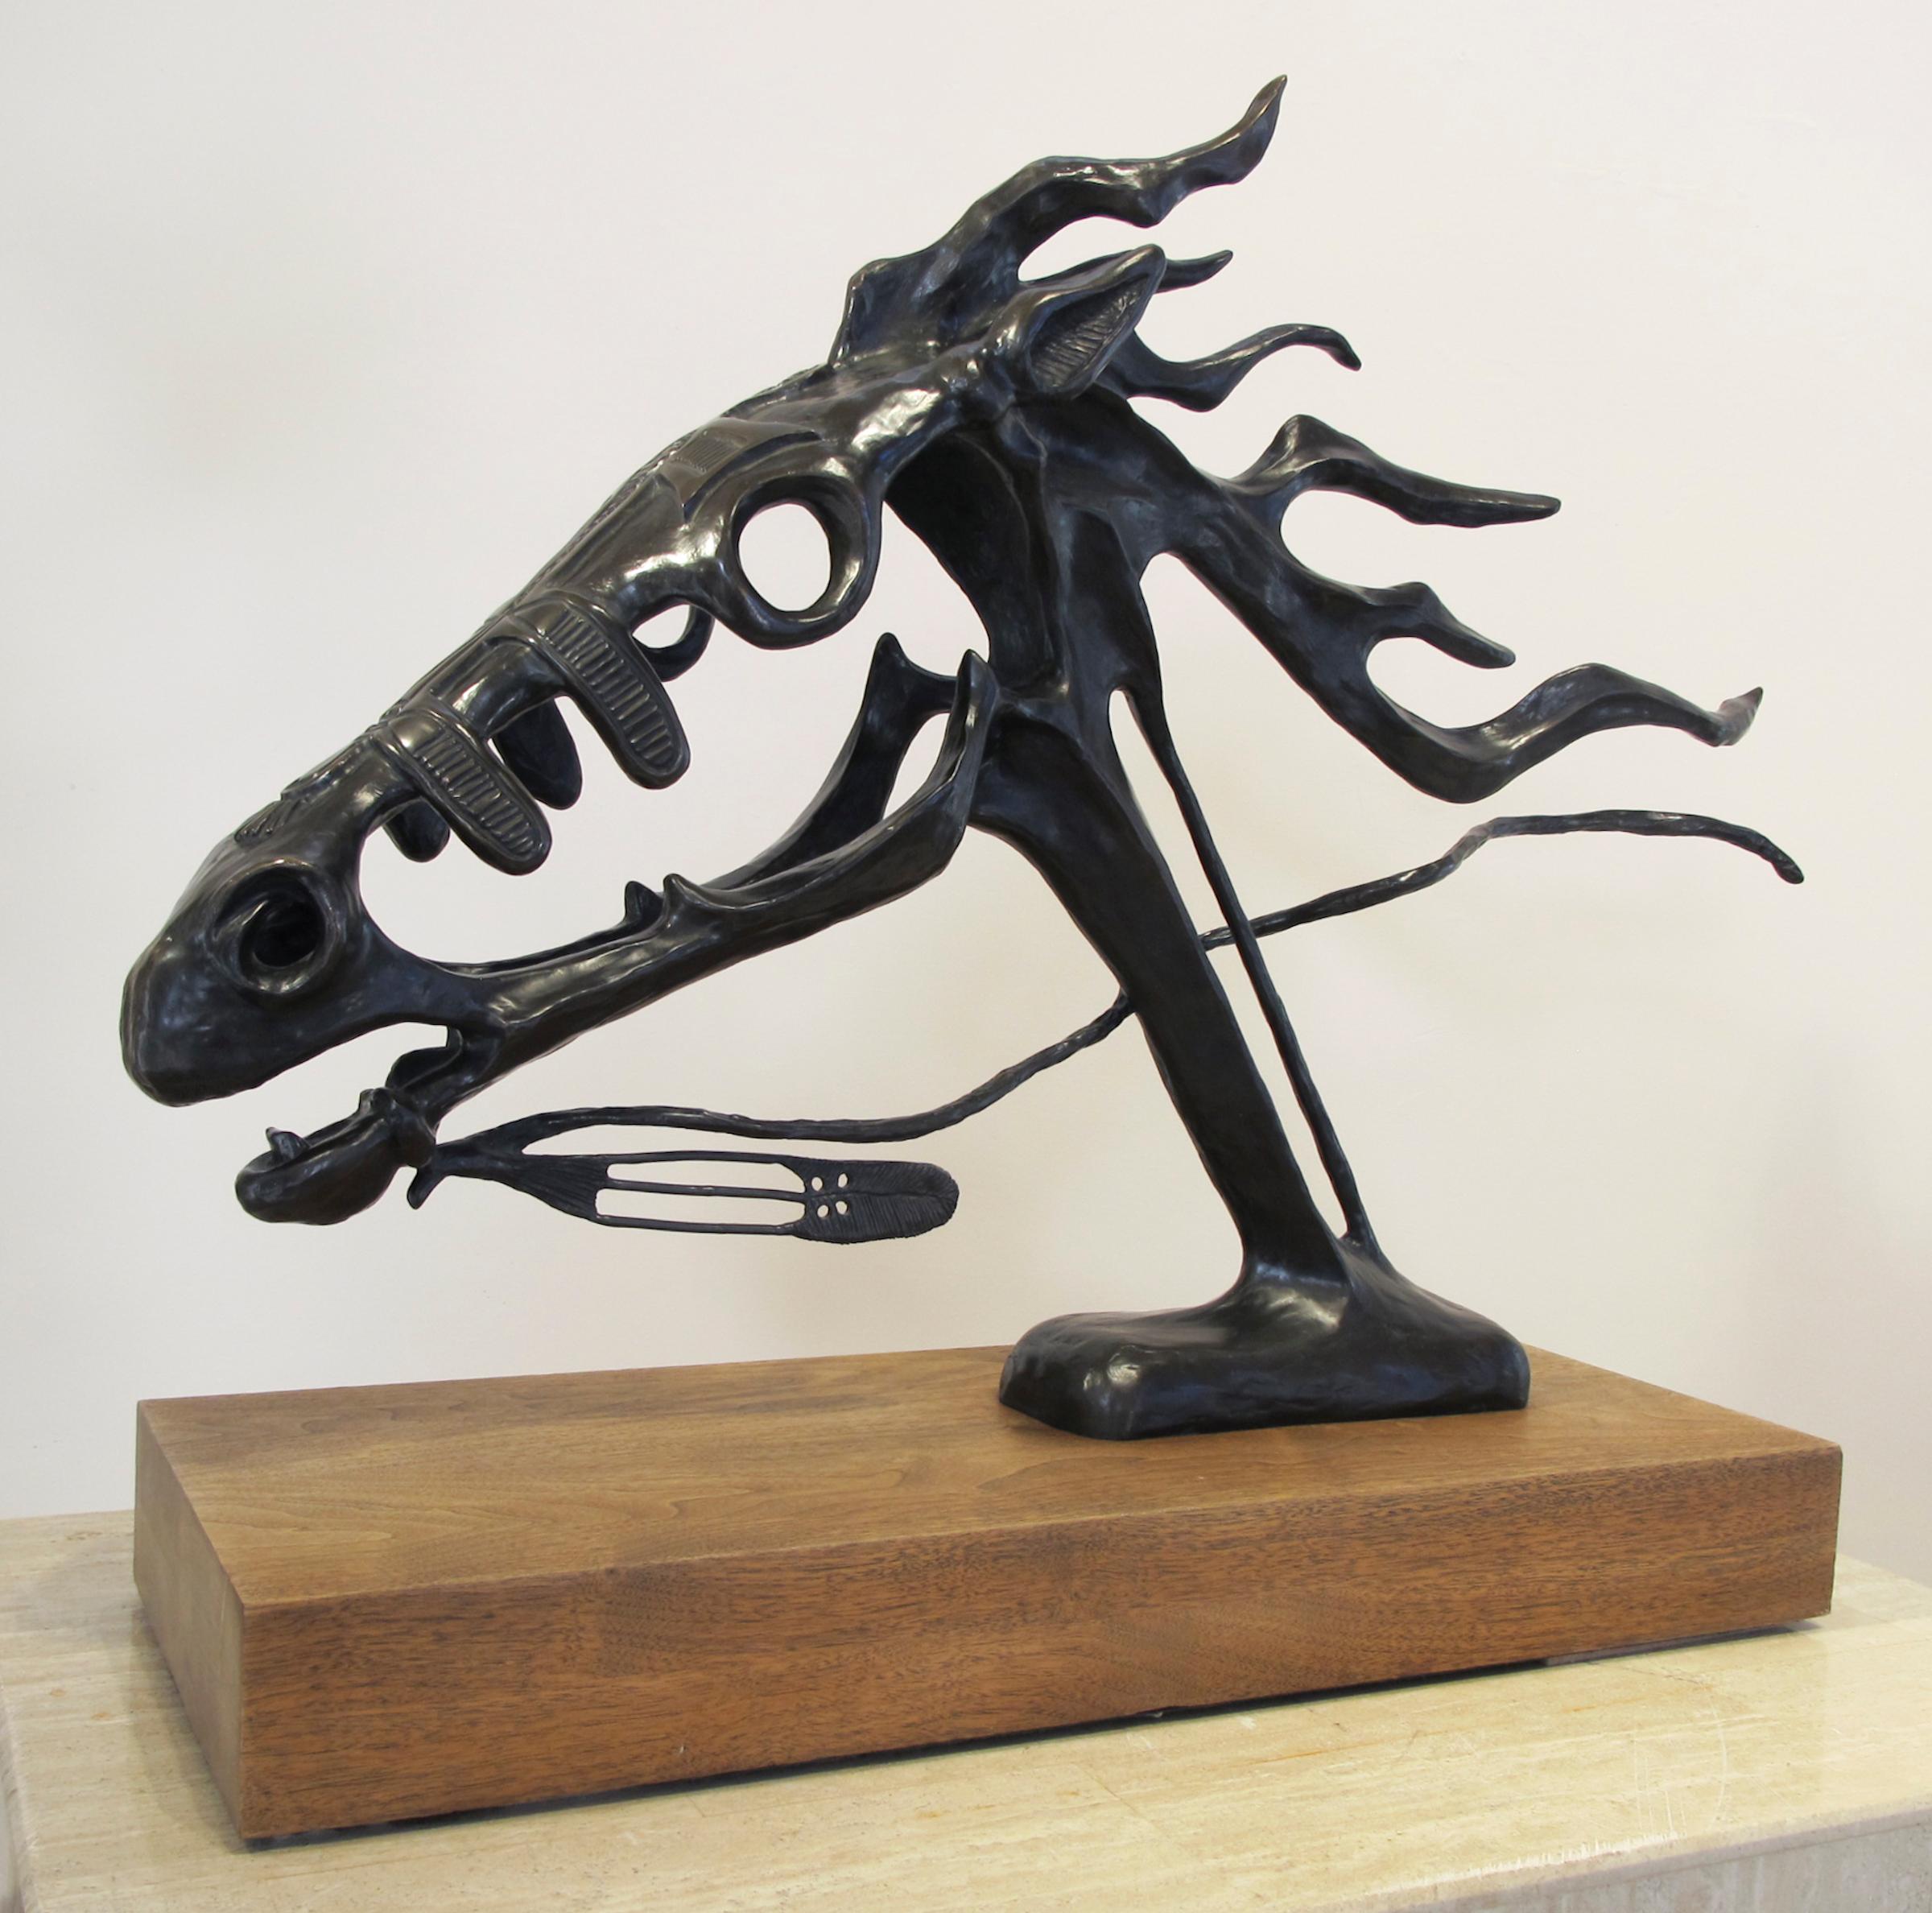 War Pony, Allan Houser,bronze sculpture, running horse, Apache, lifetime casting
Allan Houser (Haozous), Chiricahua Apache 1914-1994 recipient of the National Medal of Arts in 1992. Allan Houser's father Sam, was part of the small band of Apaches